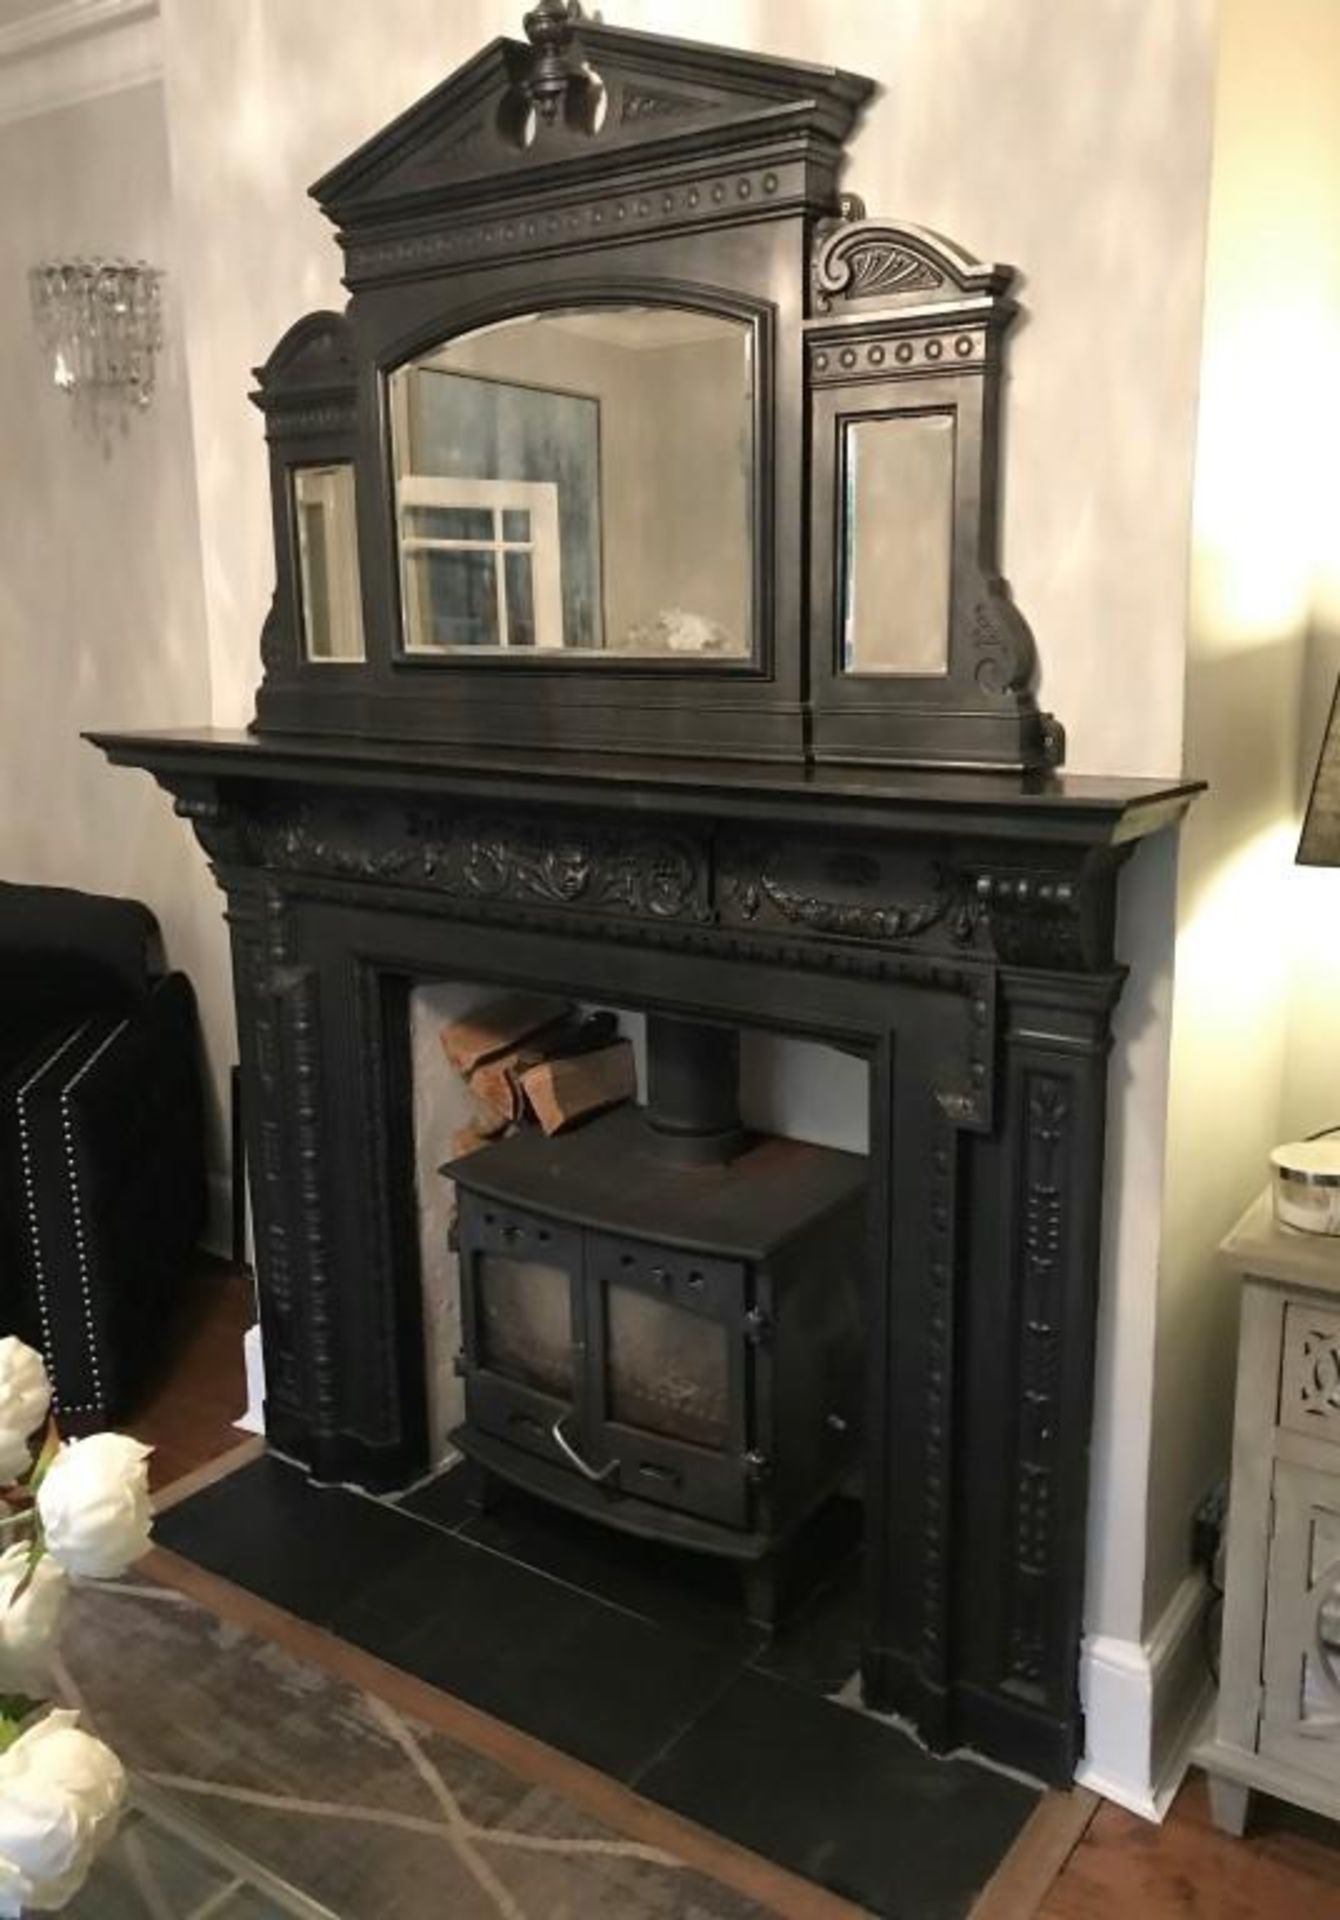 1 x Ultra Rare Stunningly Ornate Antique Victorian Cast Iron Fireplace, With Matching Cast Iron